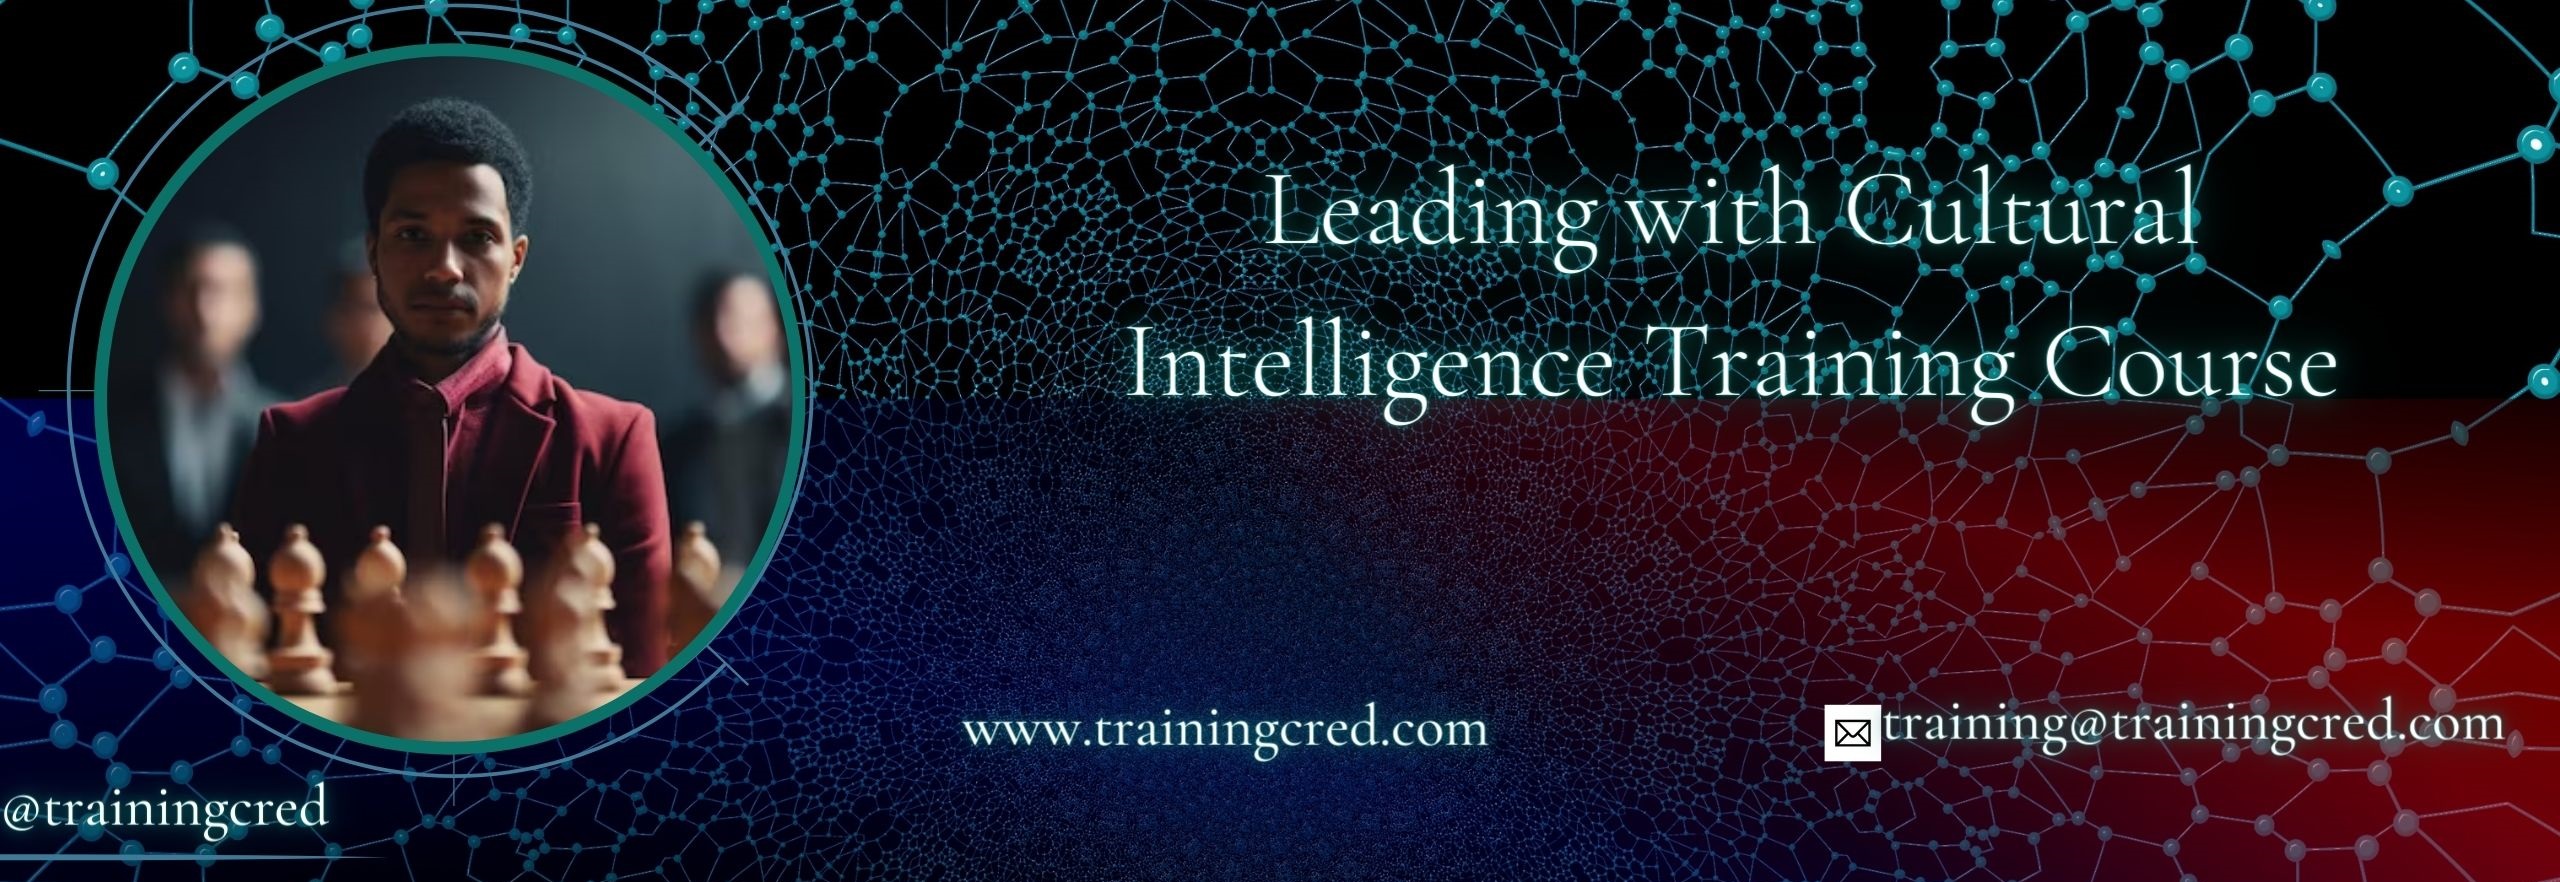 Leading with Cultural Intelligence Training